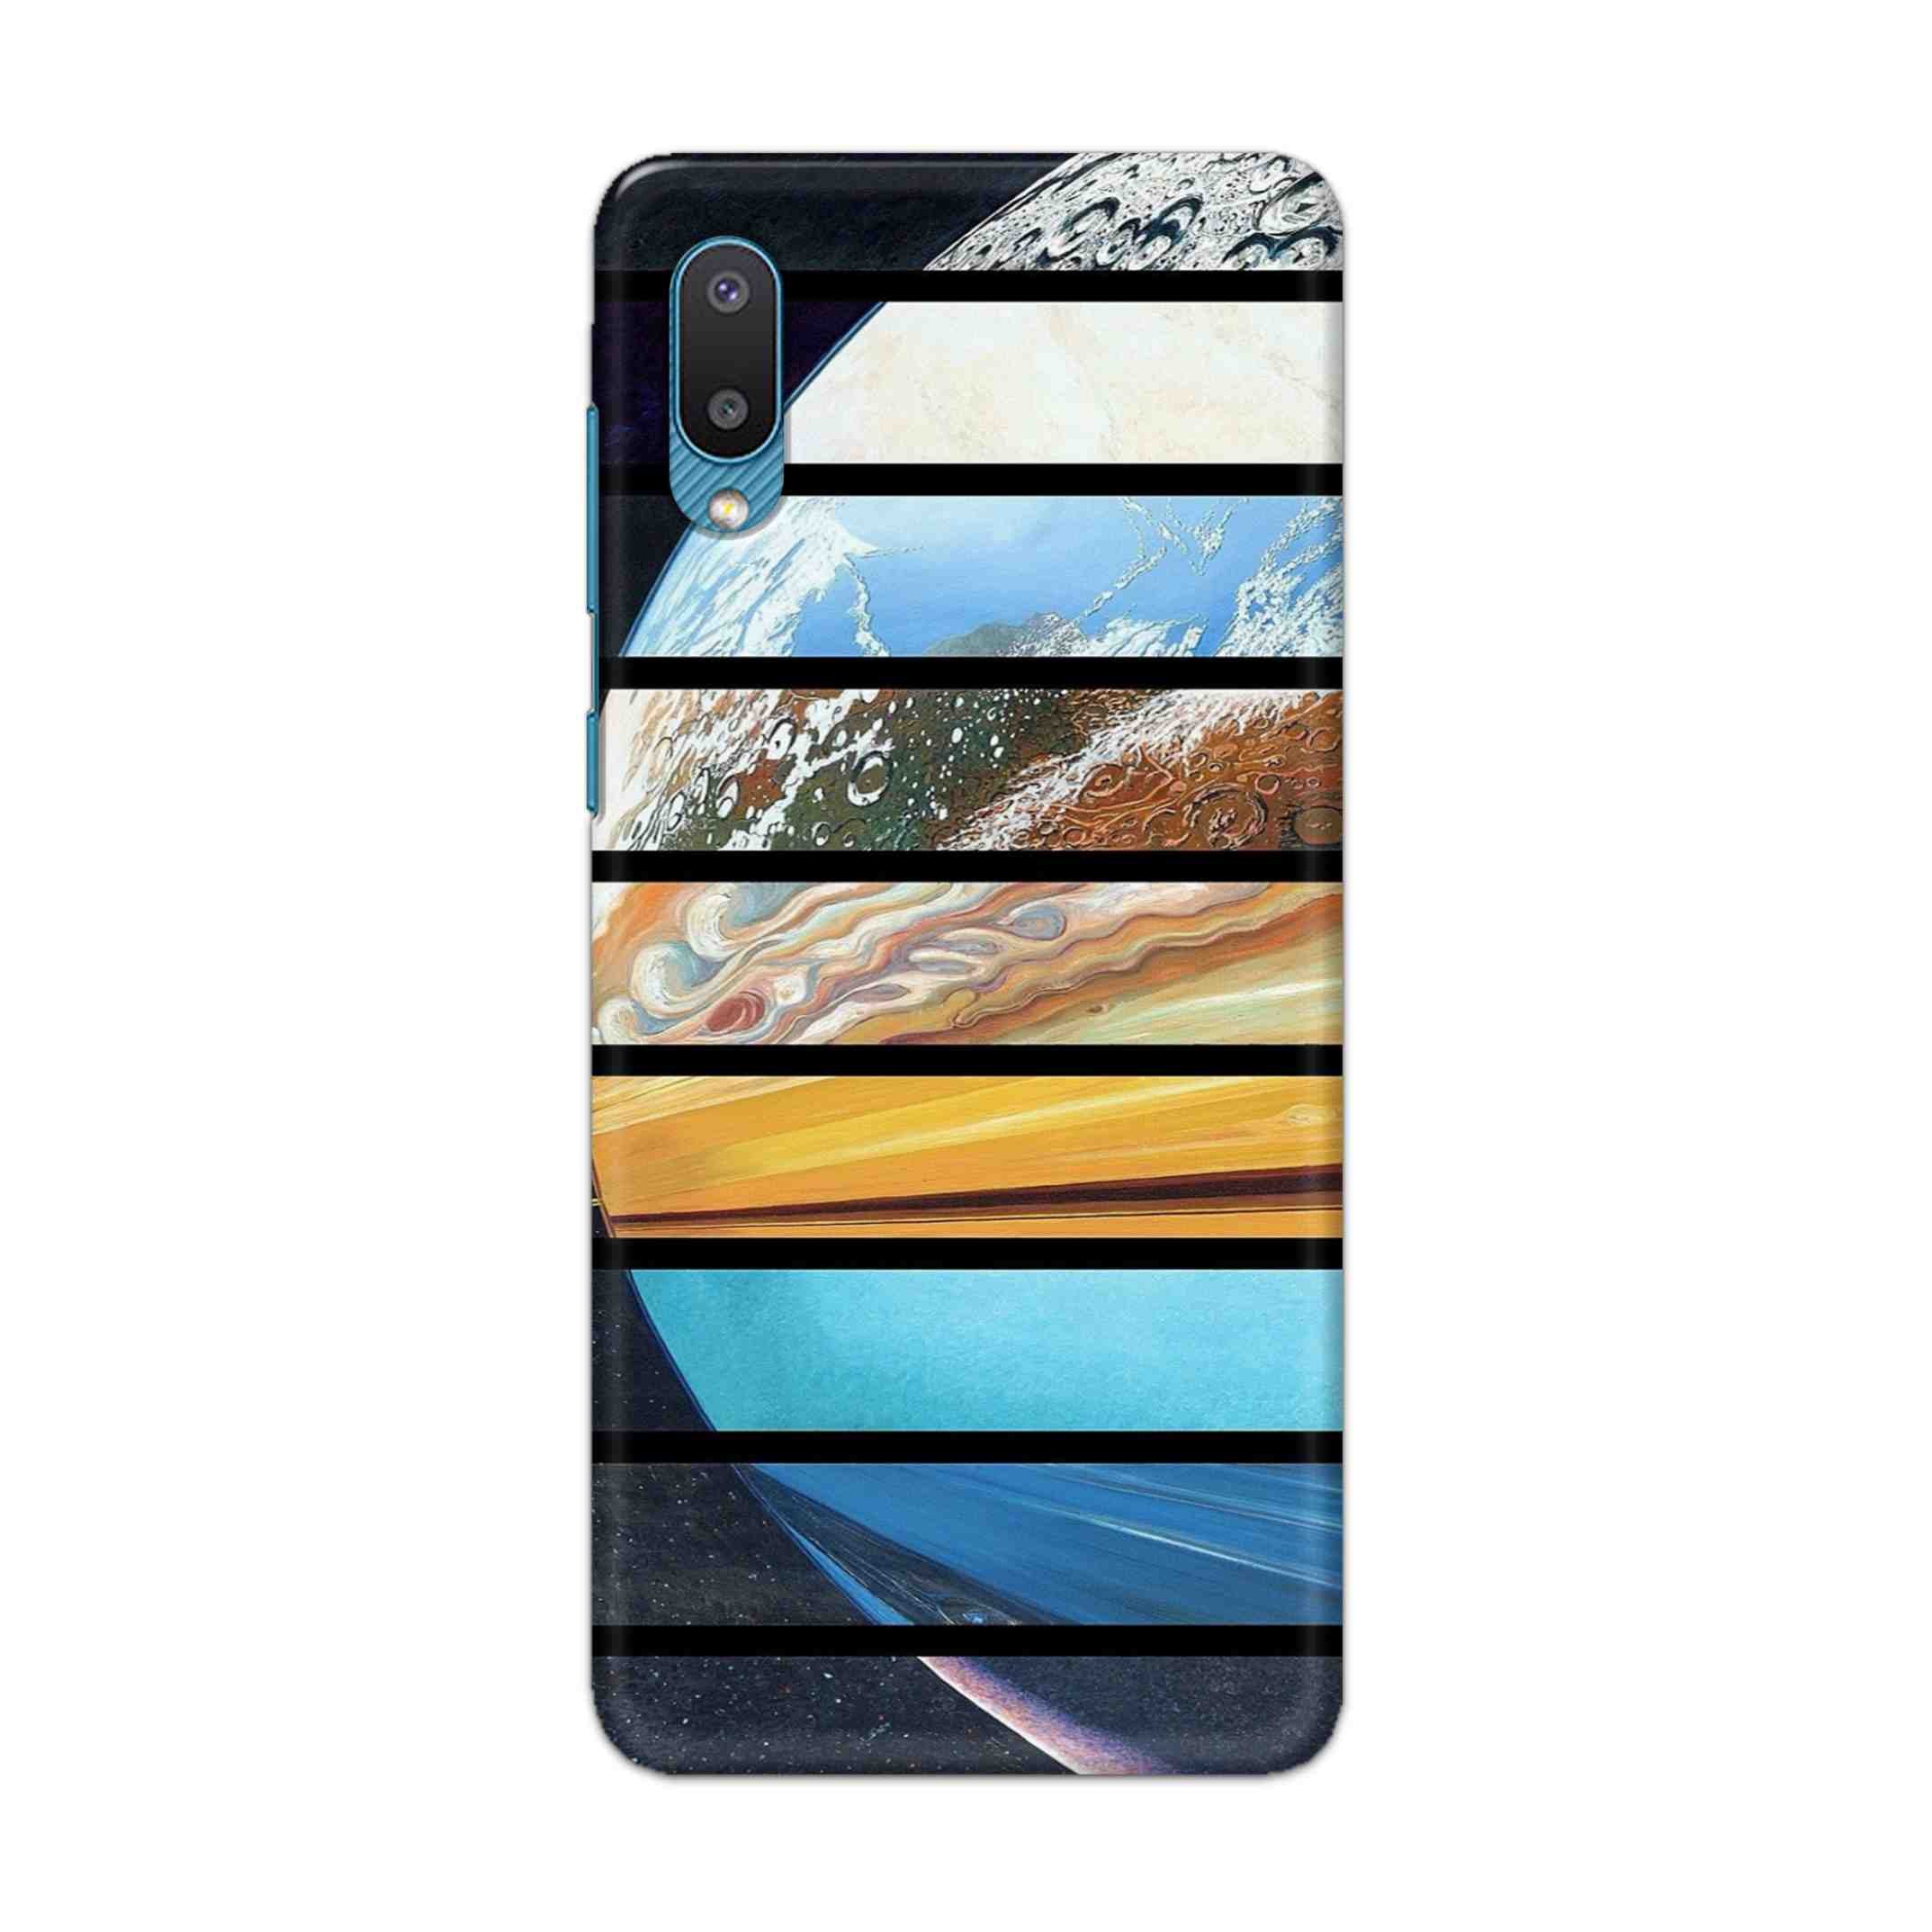 Buy Colourful Earth Hard Back Mobile Phone Case Cover For Samsung Galaxy M02 Online